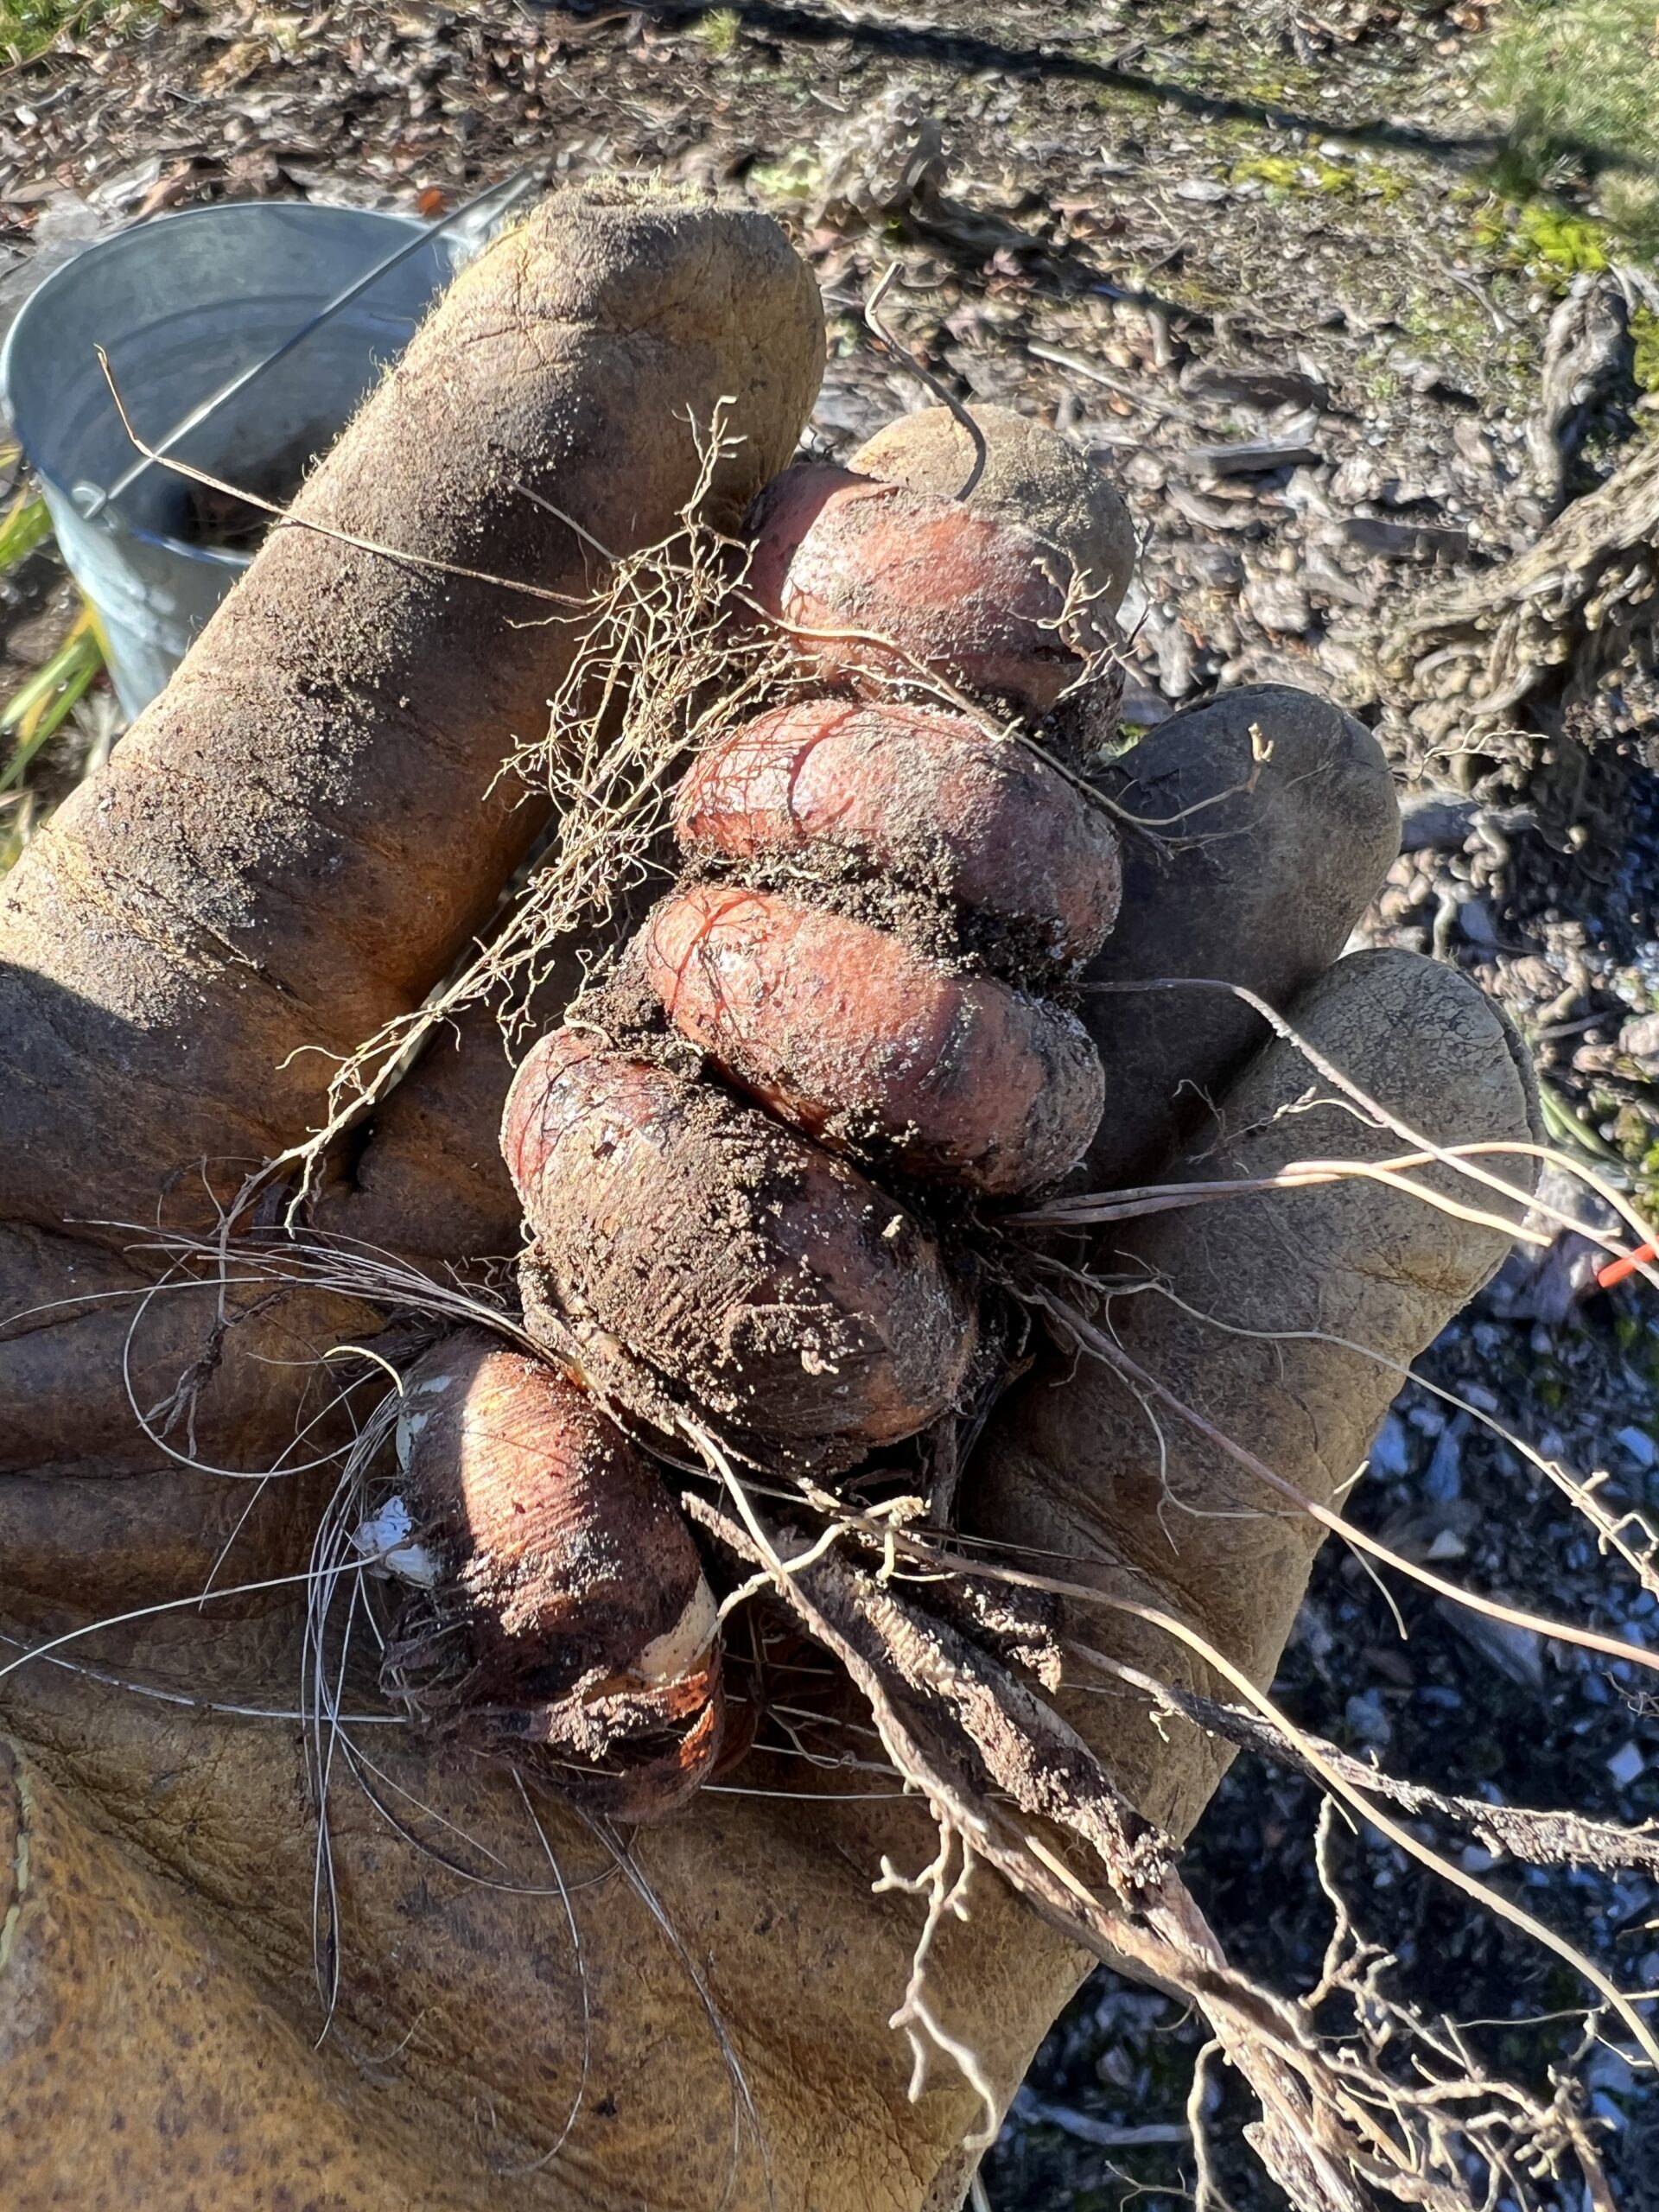 Five generations of Crocosmia corms.  The second corm from the second year was slightly larger than the first but notice that each year, each generation, the corms got smaller.  Remember to divide and replant after the third year.
ANDREW MESSINGER